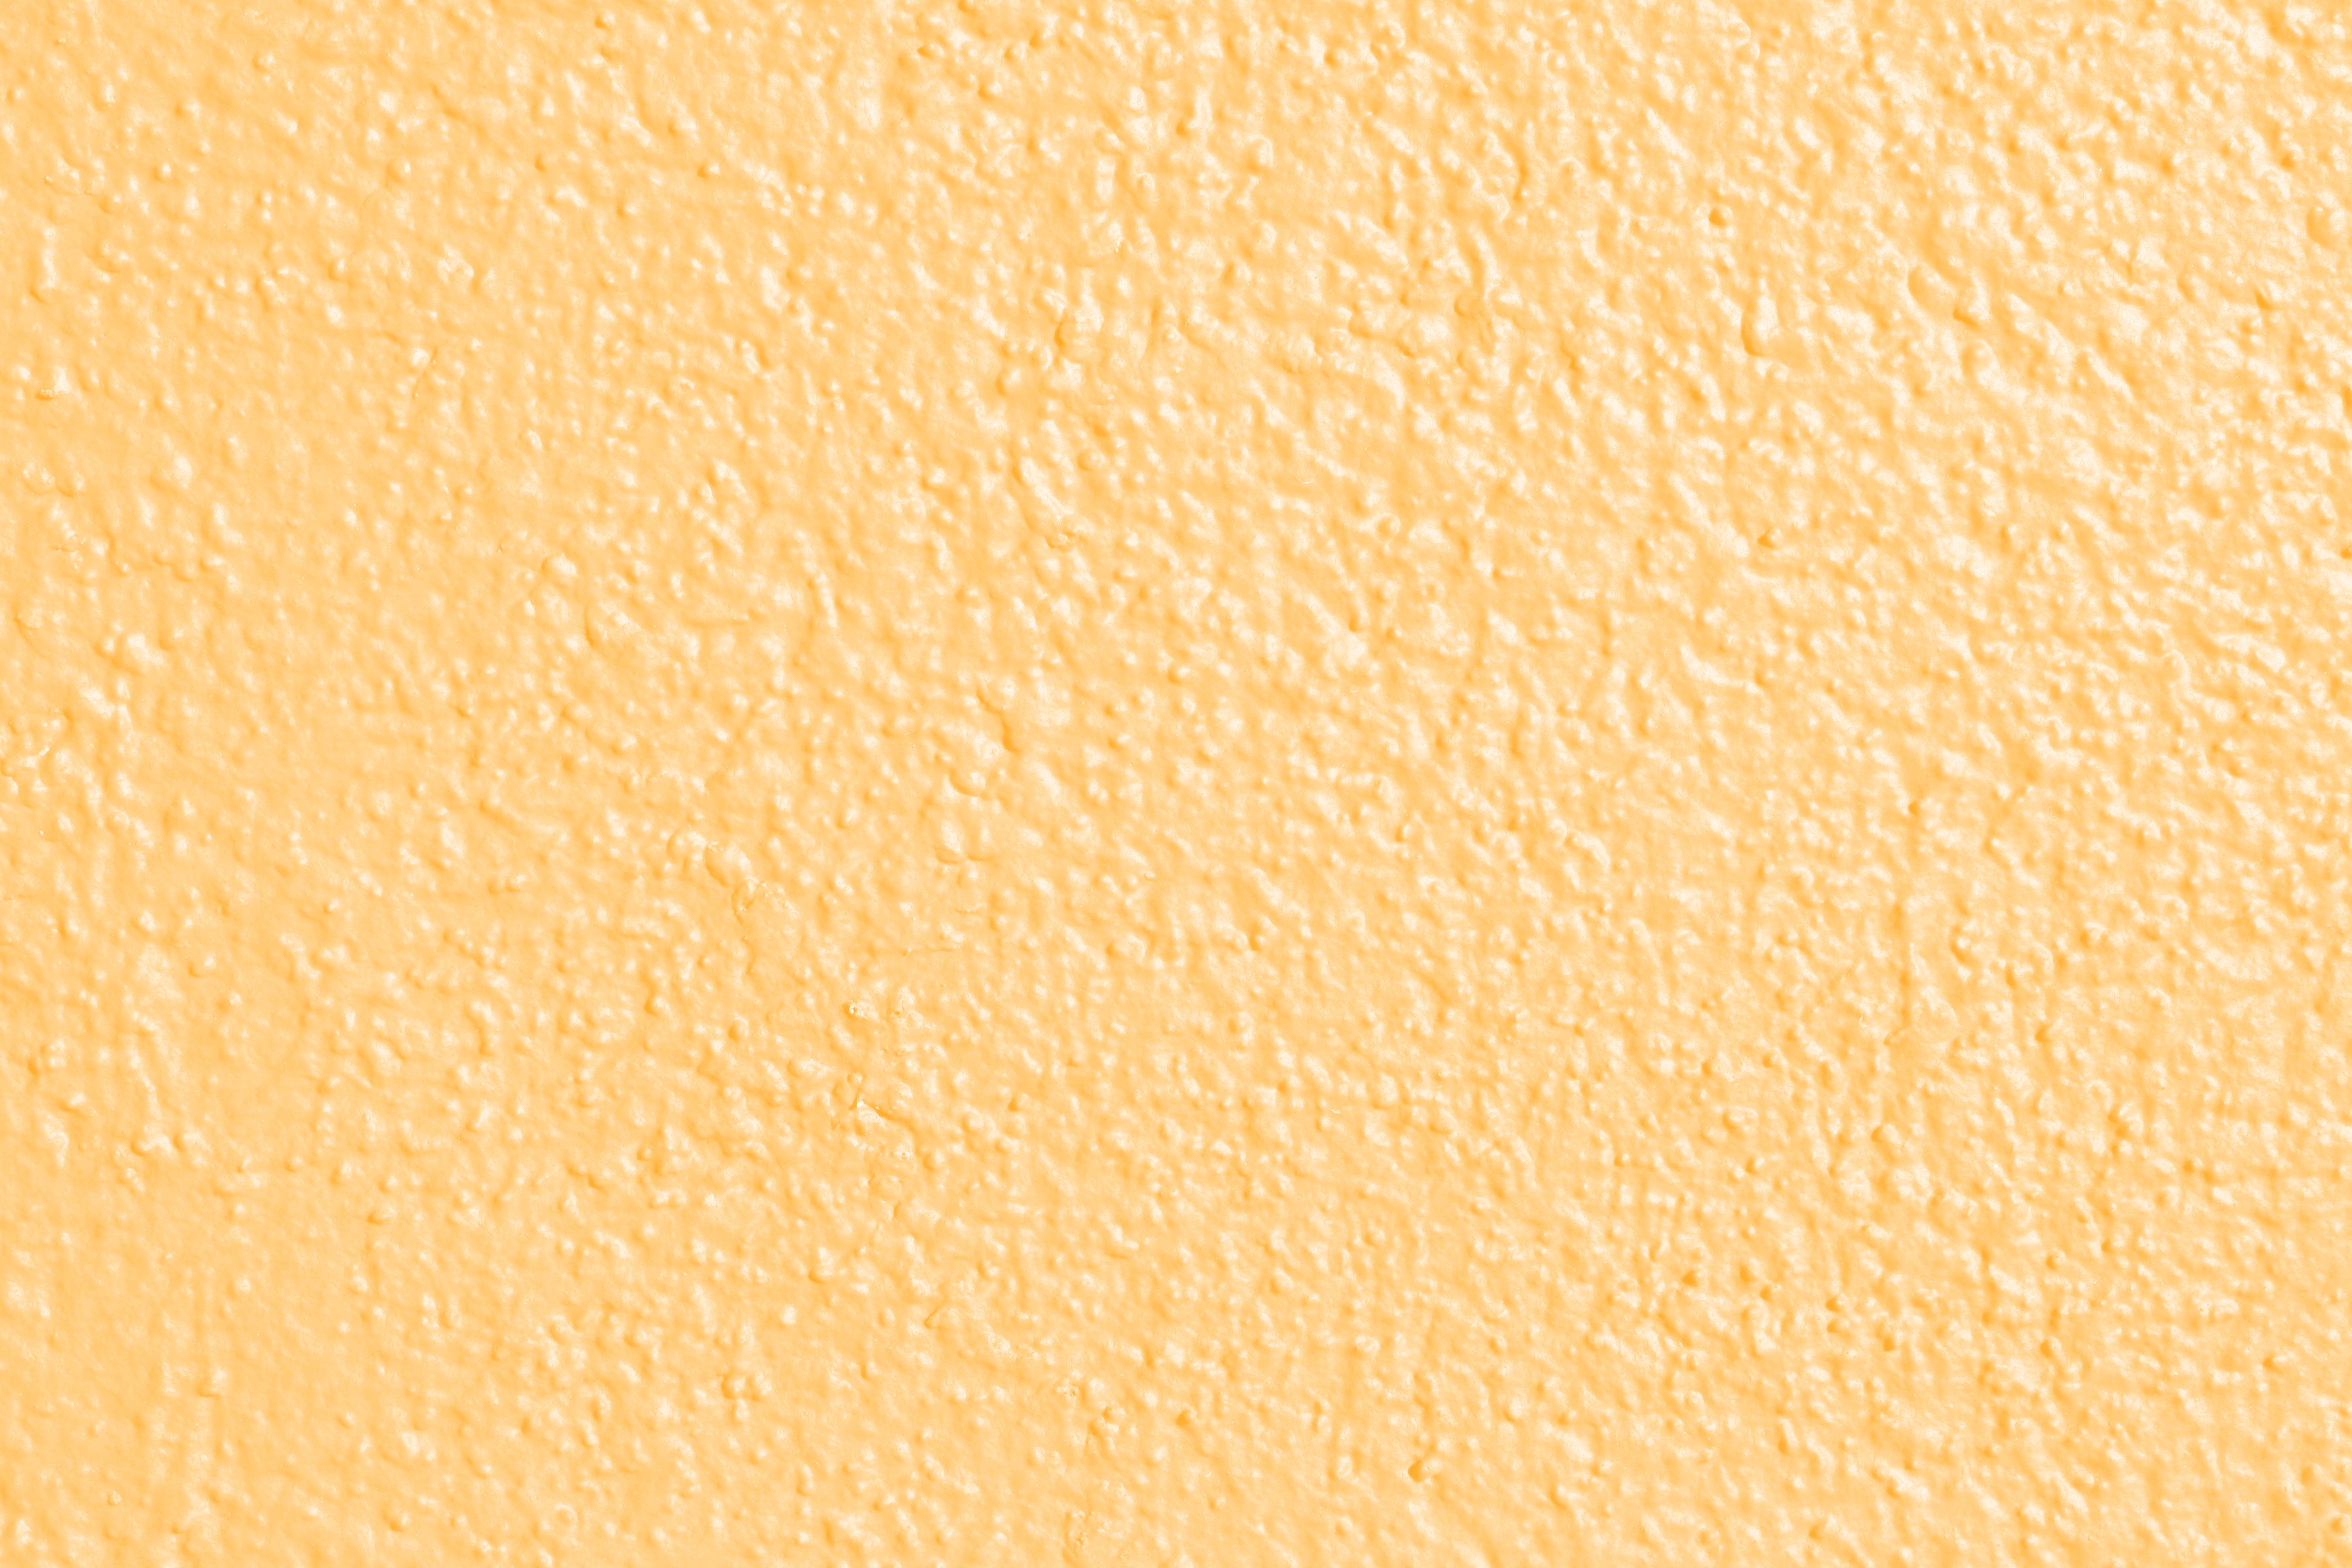 Peach or Light Orange Colored Painted Wall Texture Picture Free